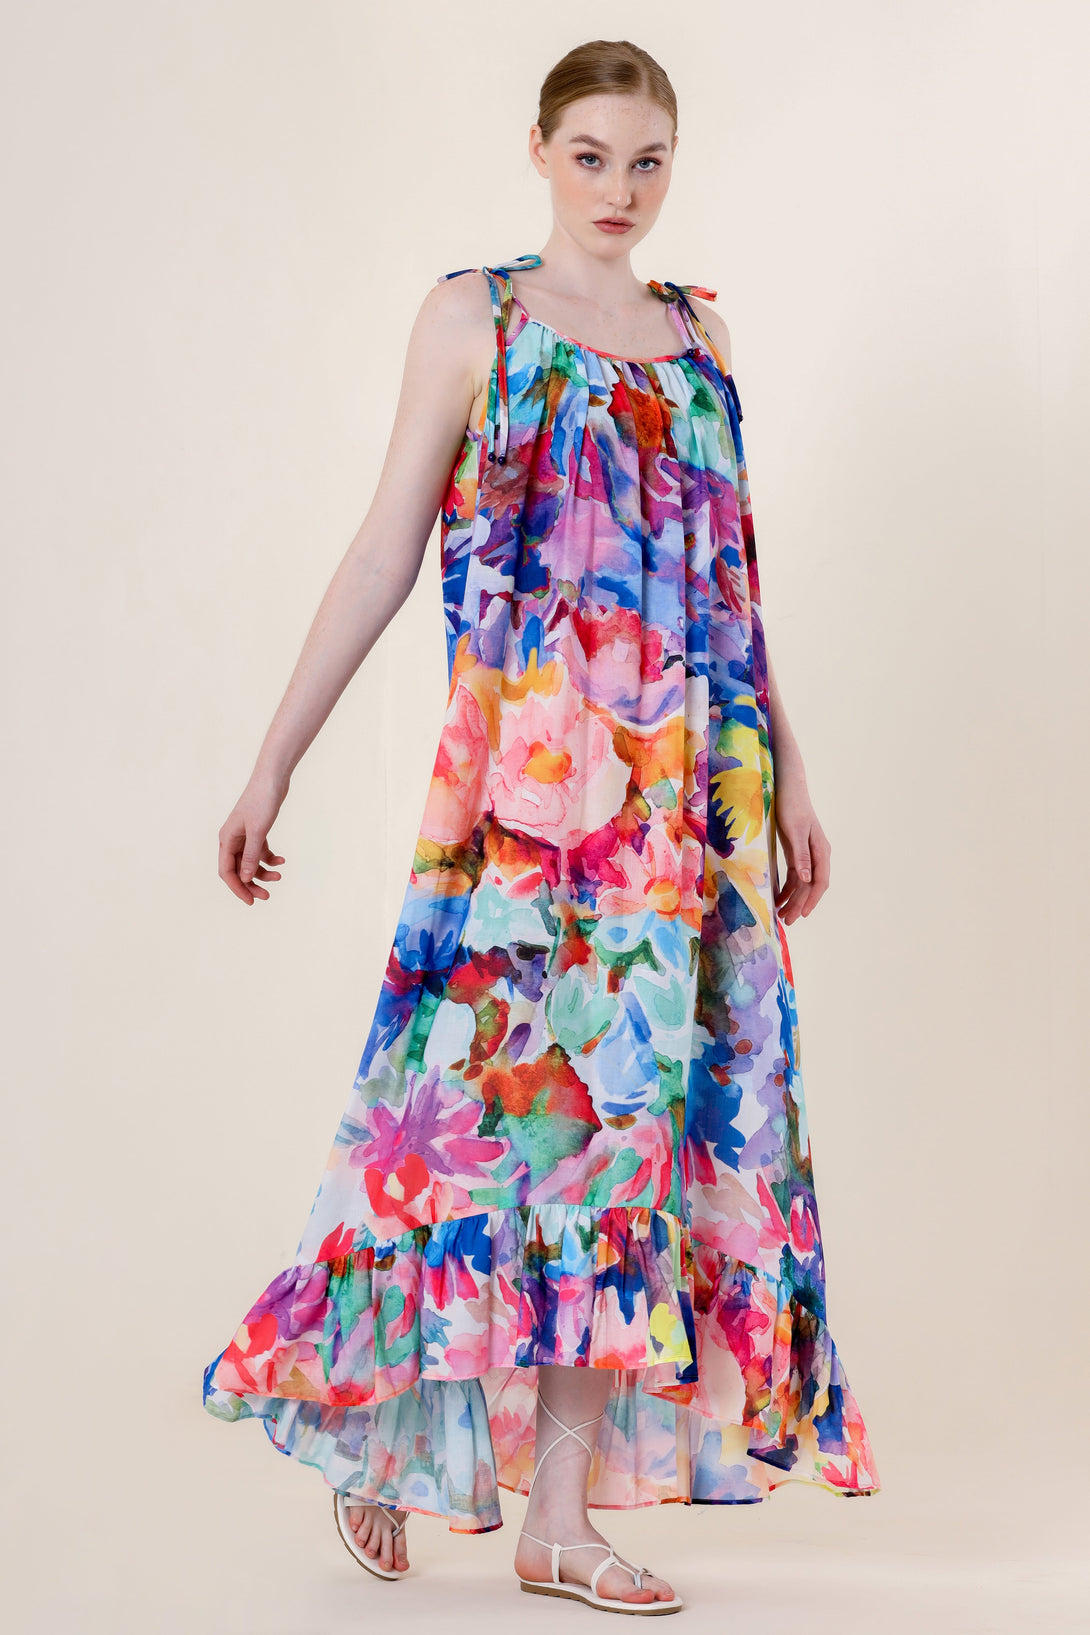 "colourful summer maxi dresses" "long cocktail dresses" "long dresses for women" "maxi colourful dress"